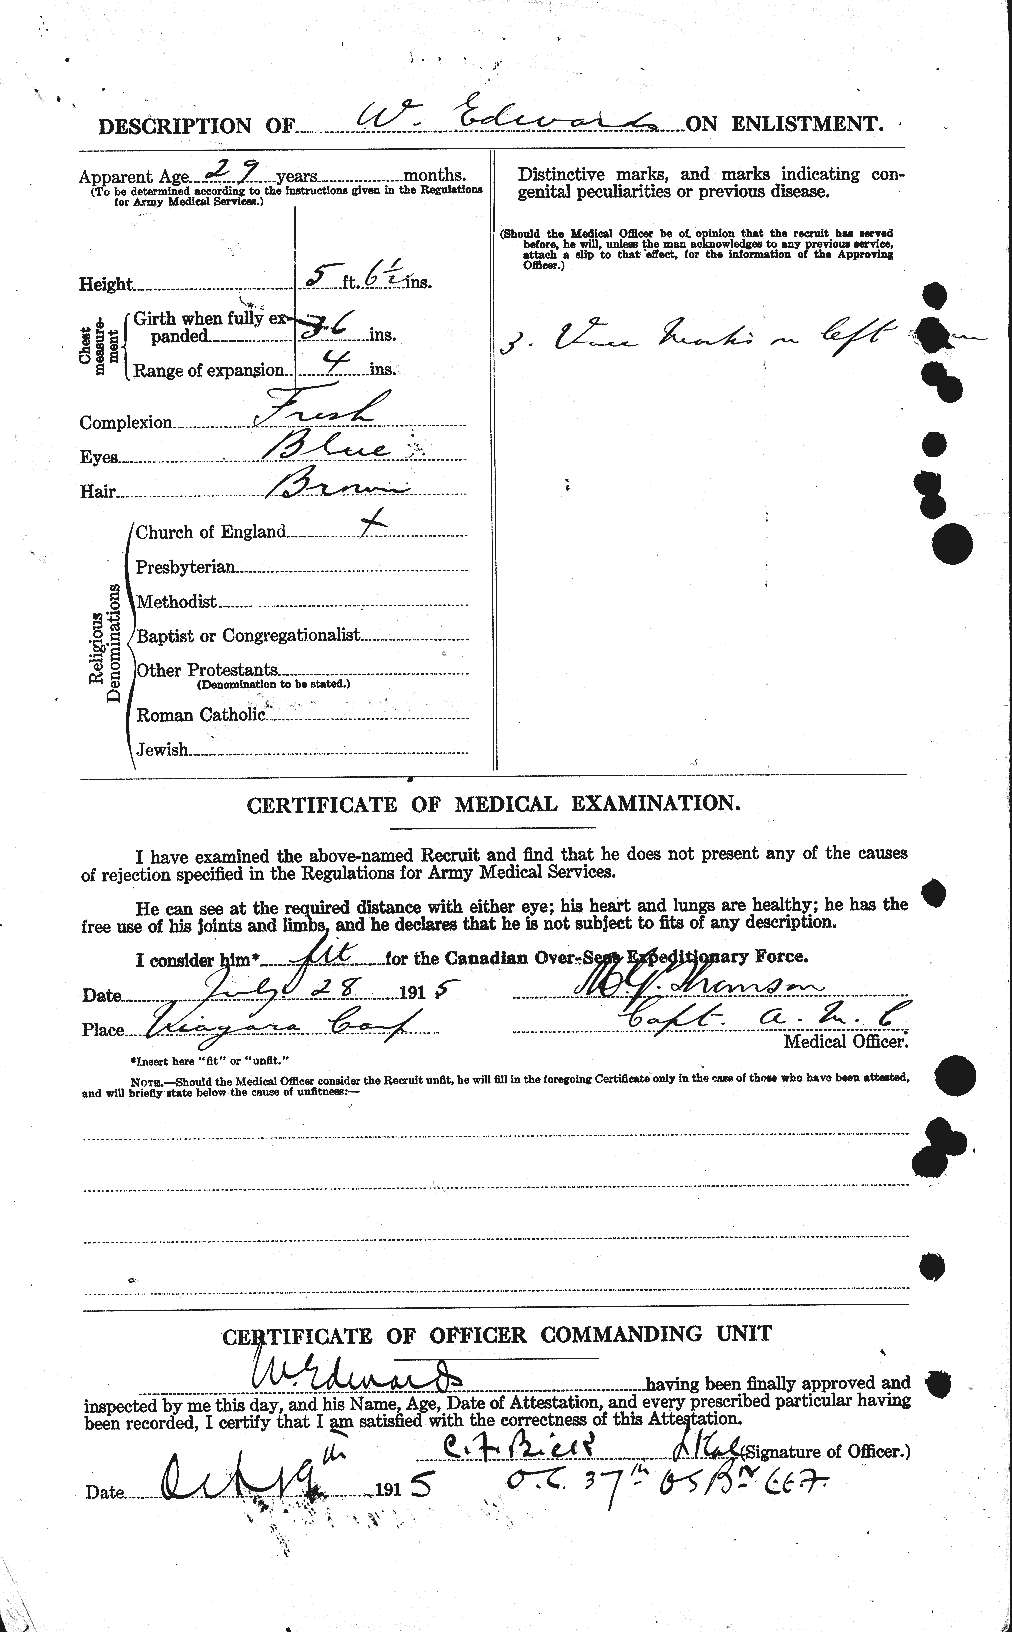 Personnel Records of the First World War - CEF 310364b